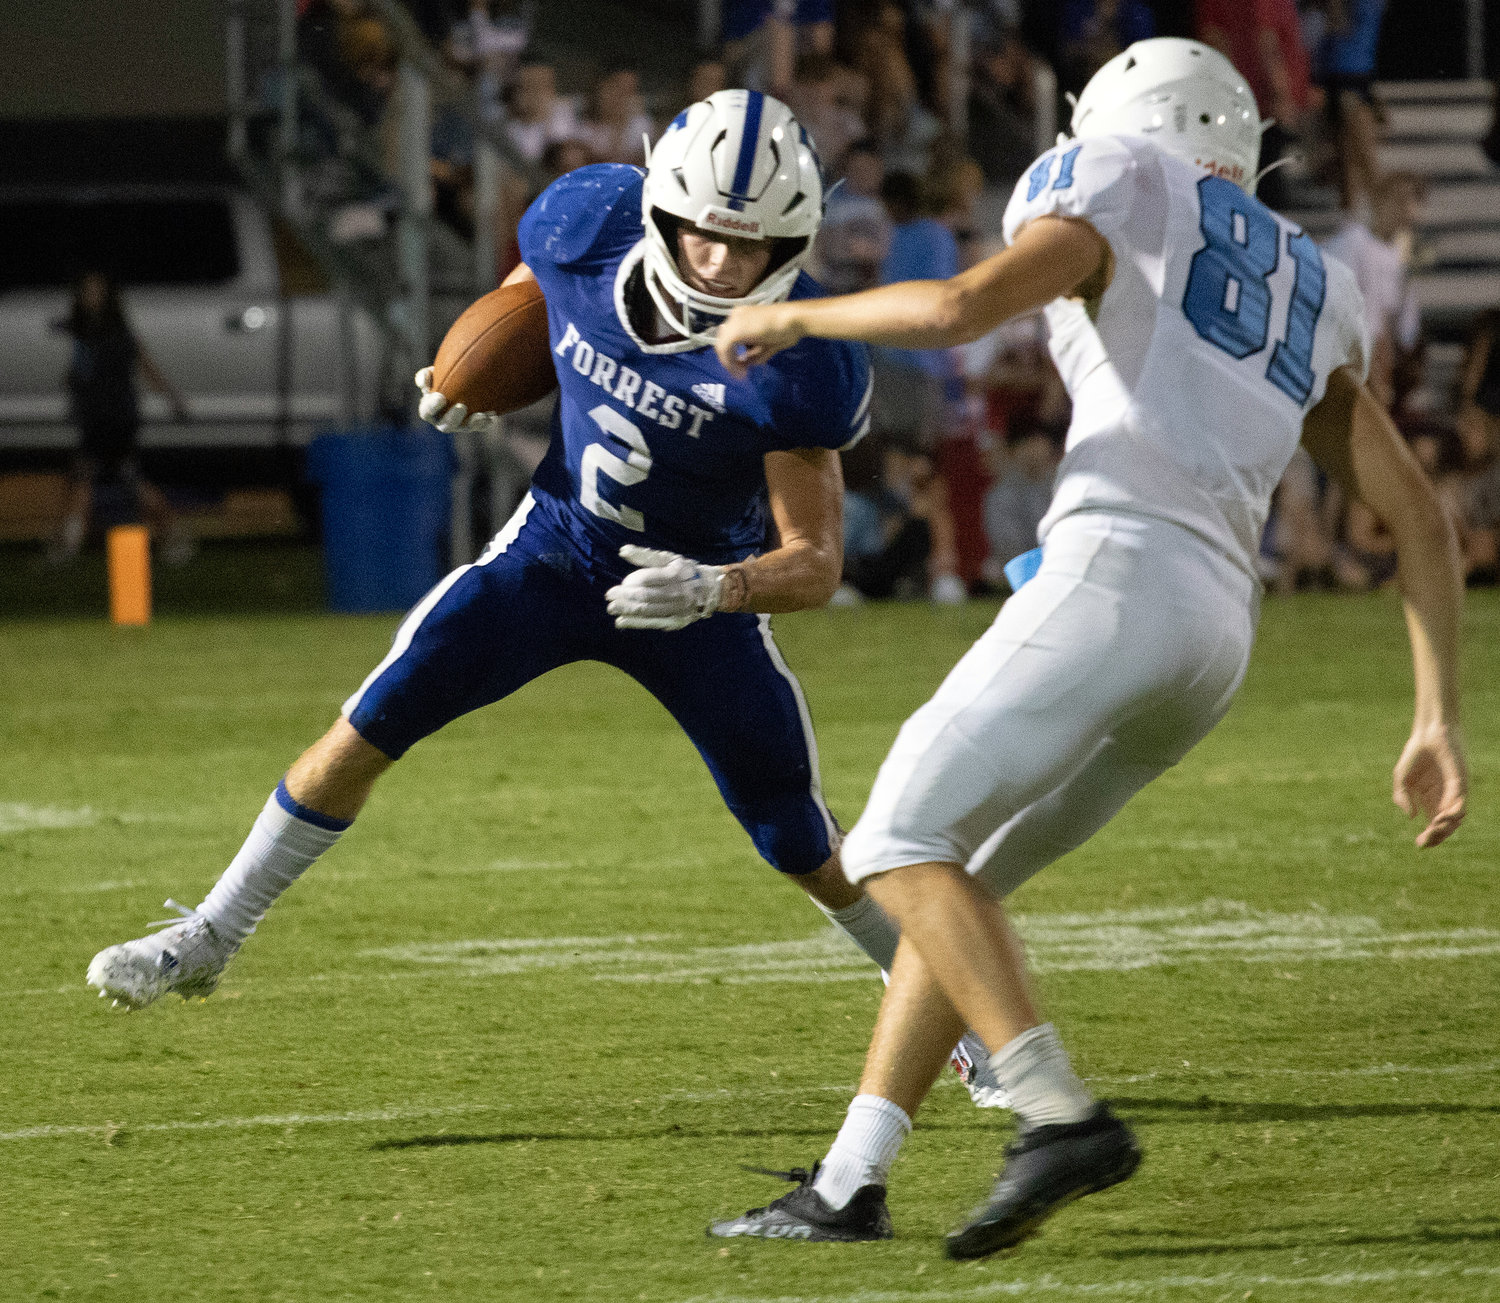 Tayton Swift carries the ball for the Rockets in the second half.